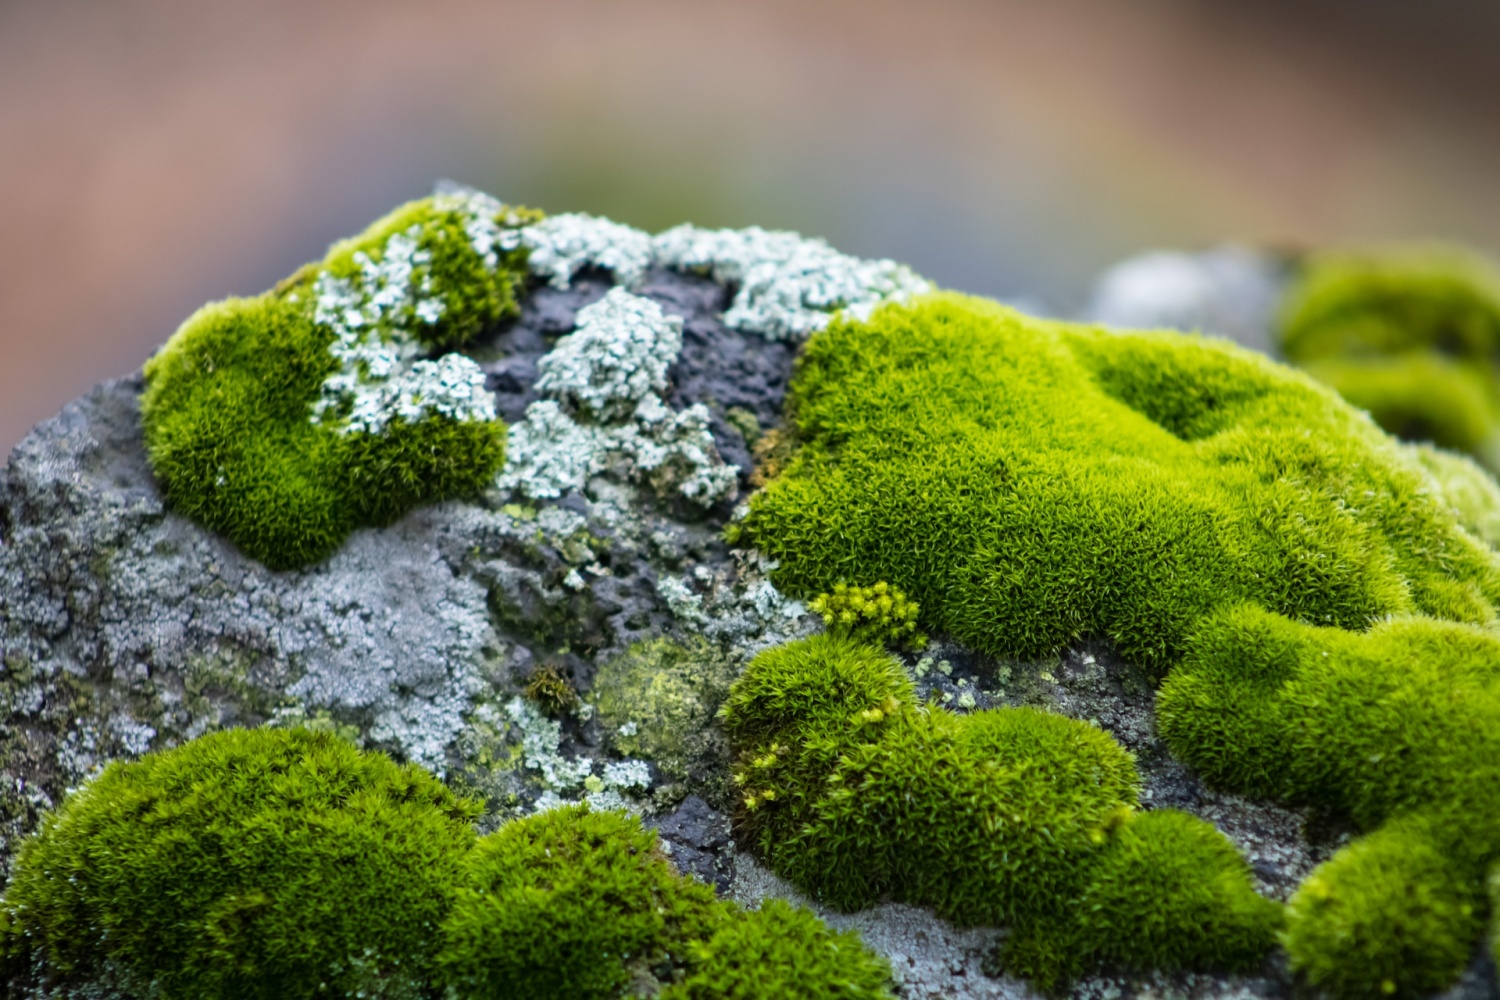 Climate Change Is Threatening This 165-Million-Year Old Moss Species: Study